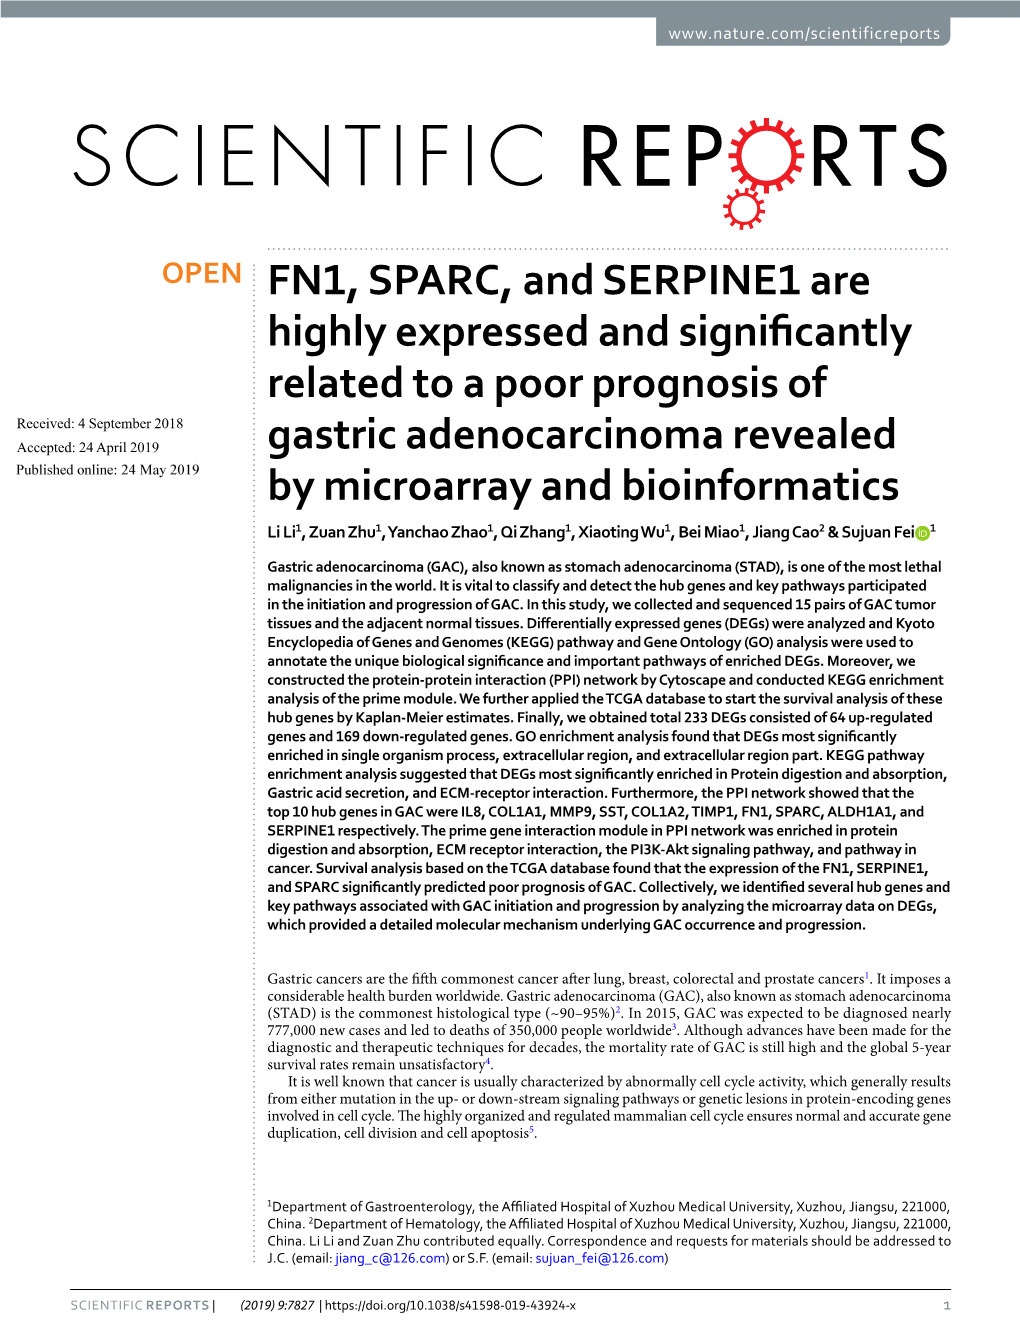 FN1, SPARC, and SERPINE1 Are Highly Expressed and Significantly